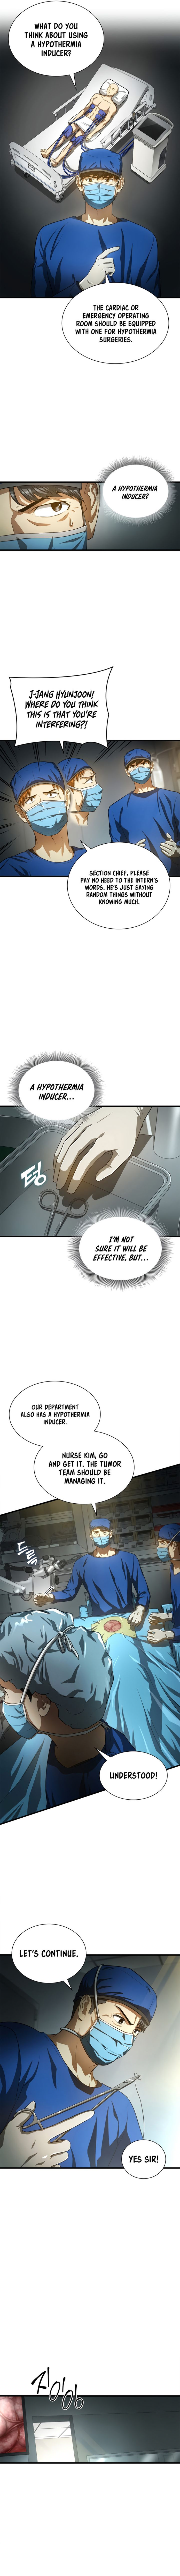 Perfect Surgeon Chapter 18 Page 7